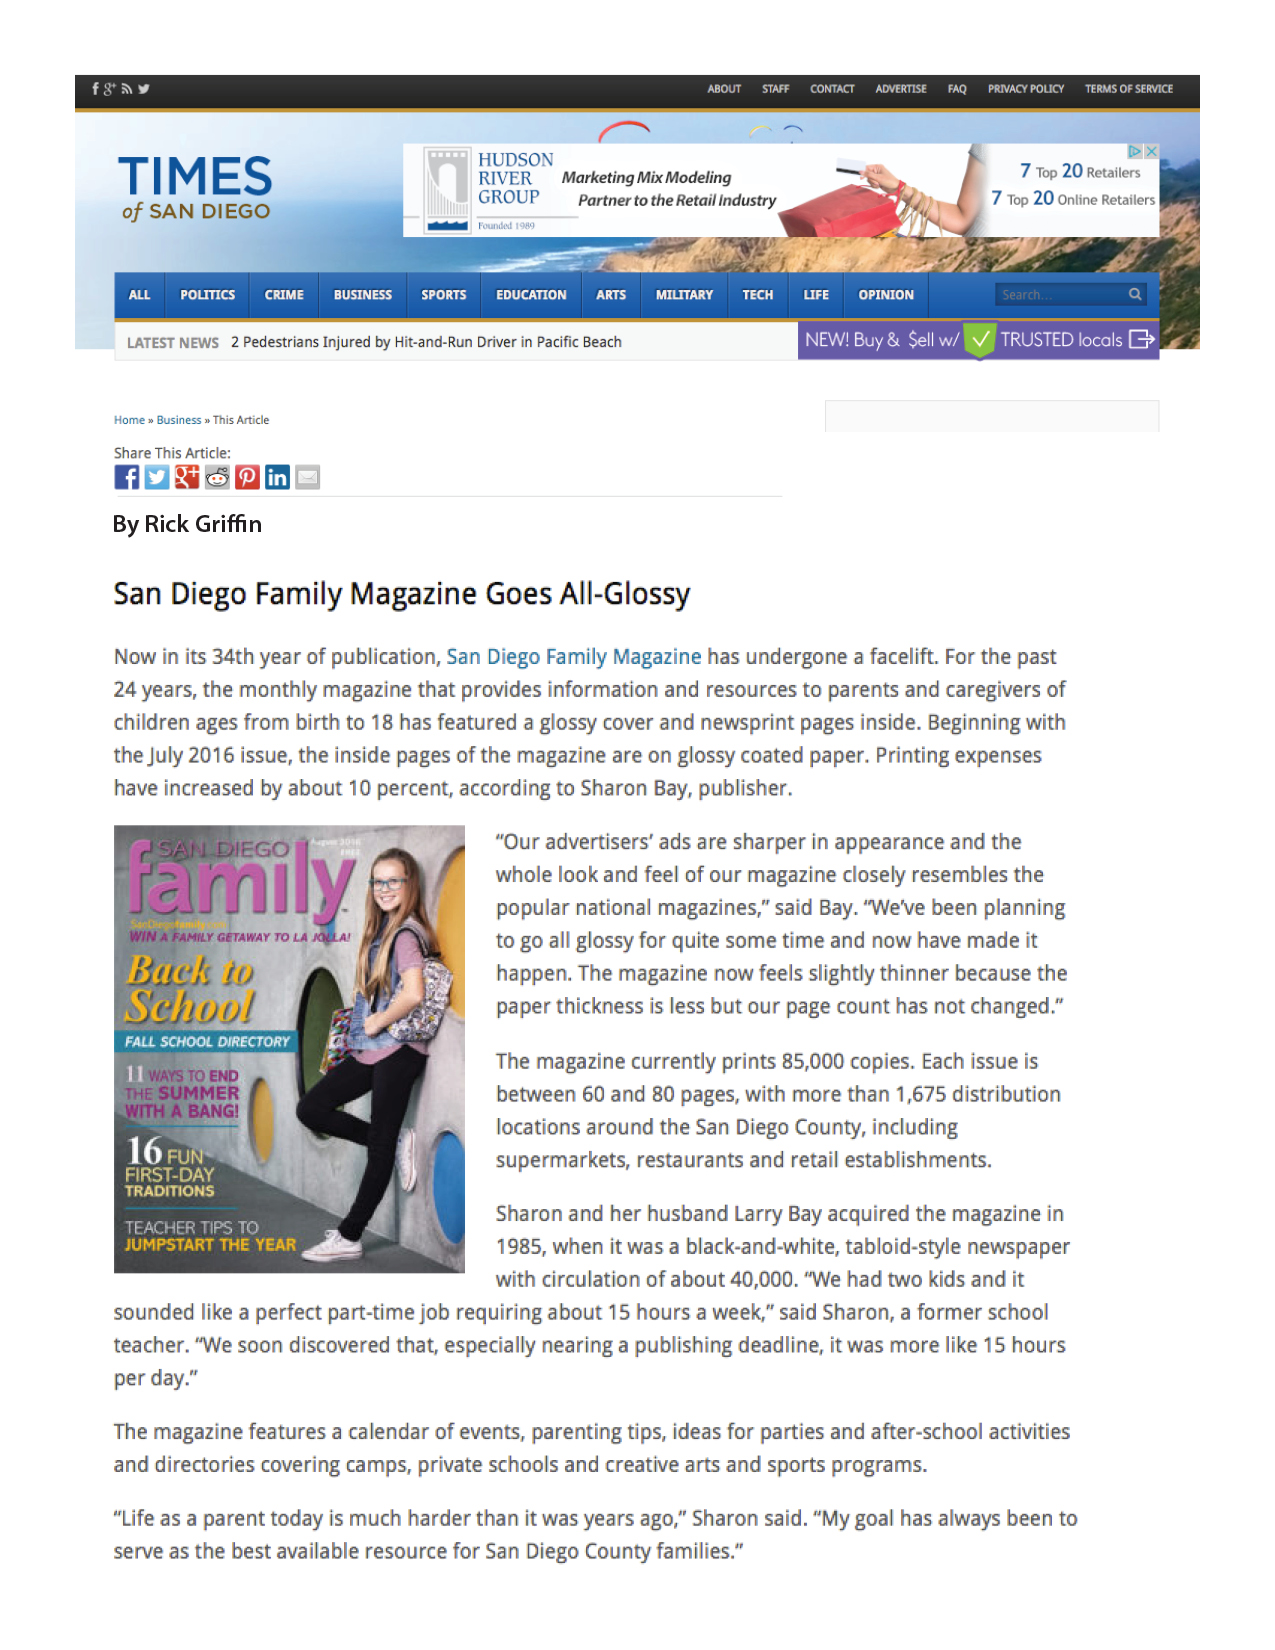 Artilcle about San Diego Family Magazine new glossy look.